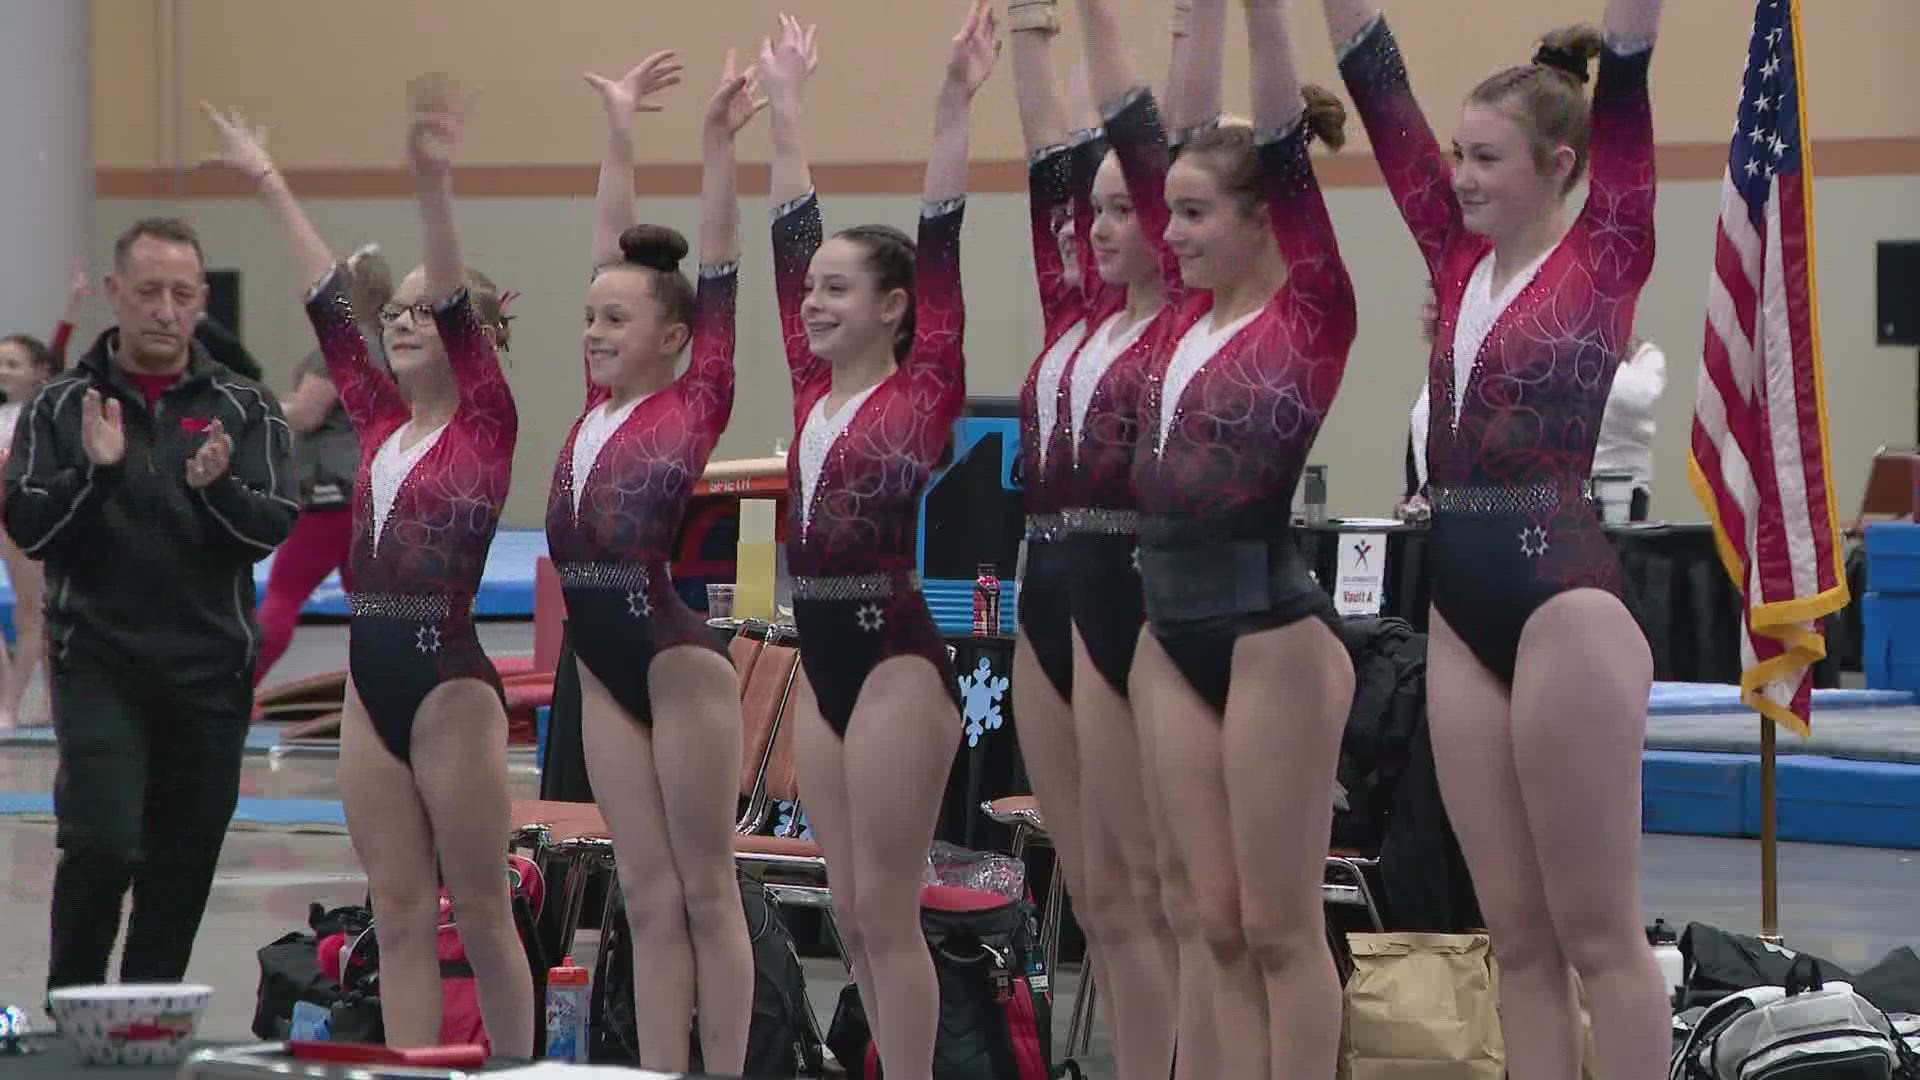 Des Moines' based Chow's Gymnastics and Dance is hosting its Winter Classic and Winter Classic Cup, where more than 1,100 gymnasts will compete.